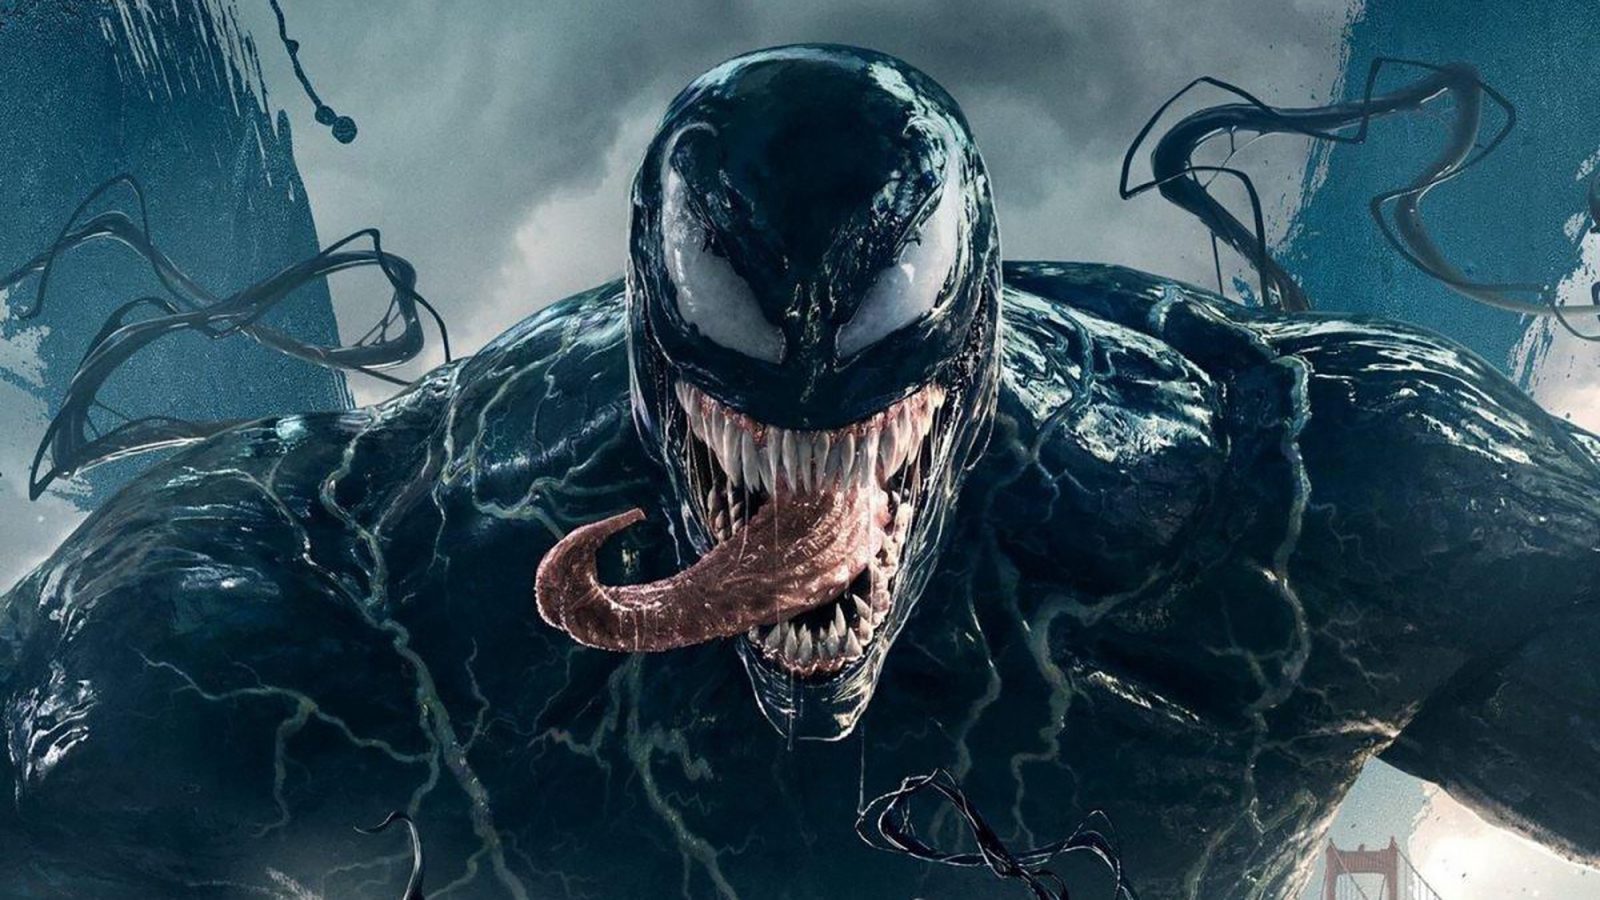 Which Three Marvel Characters Are You A Combo Of? Venom